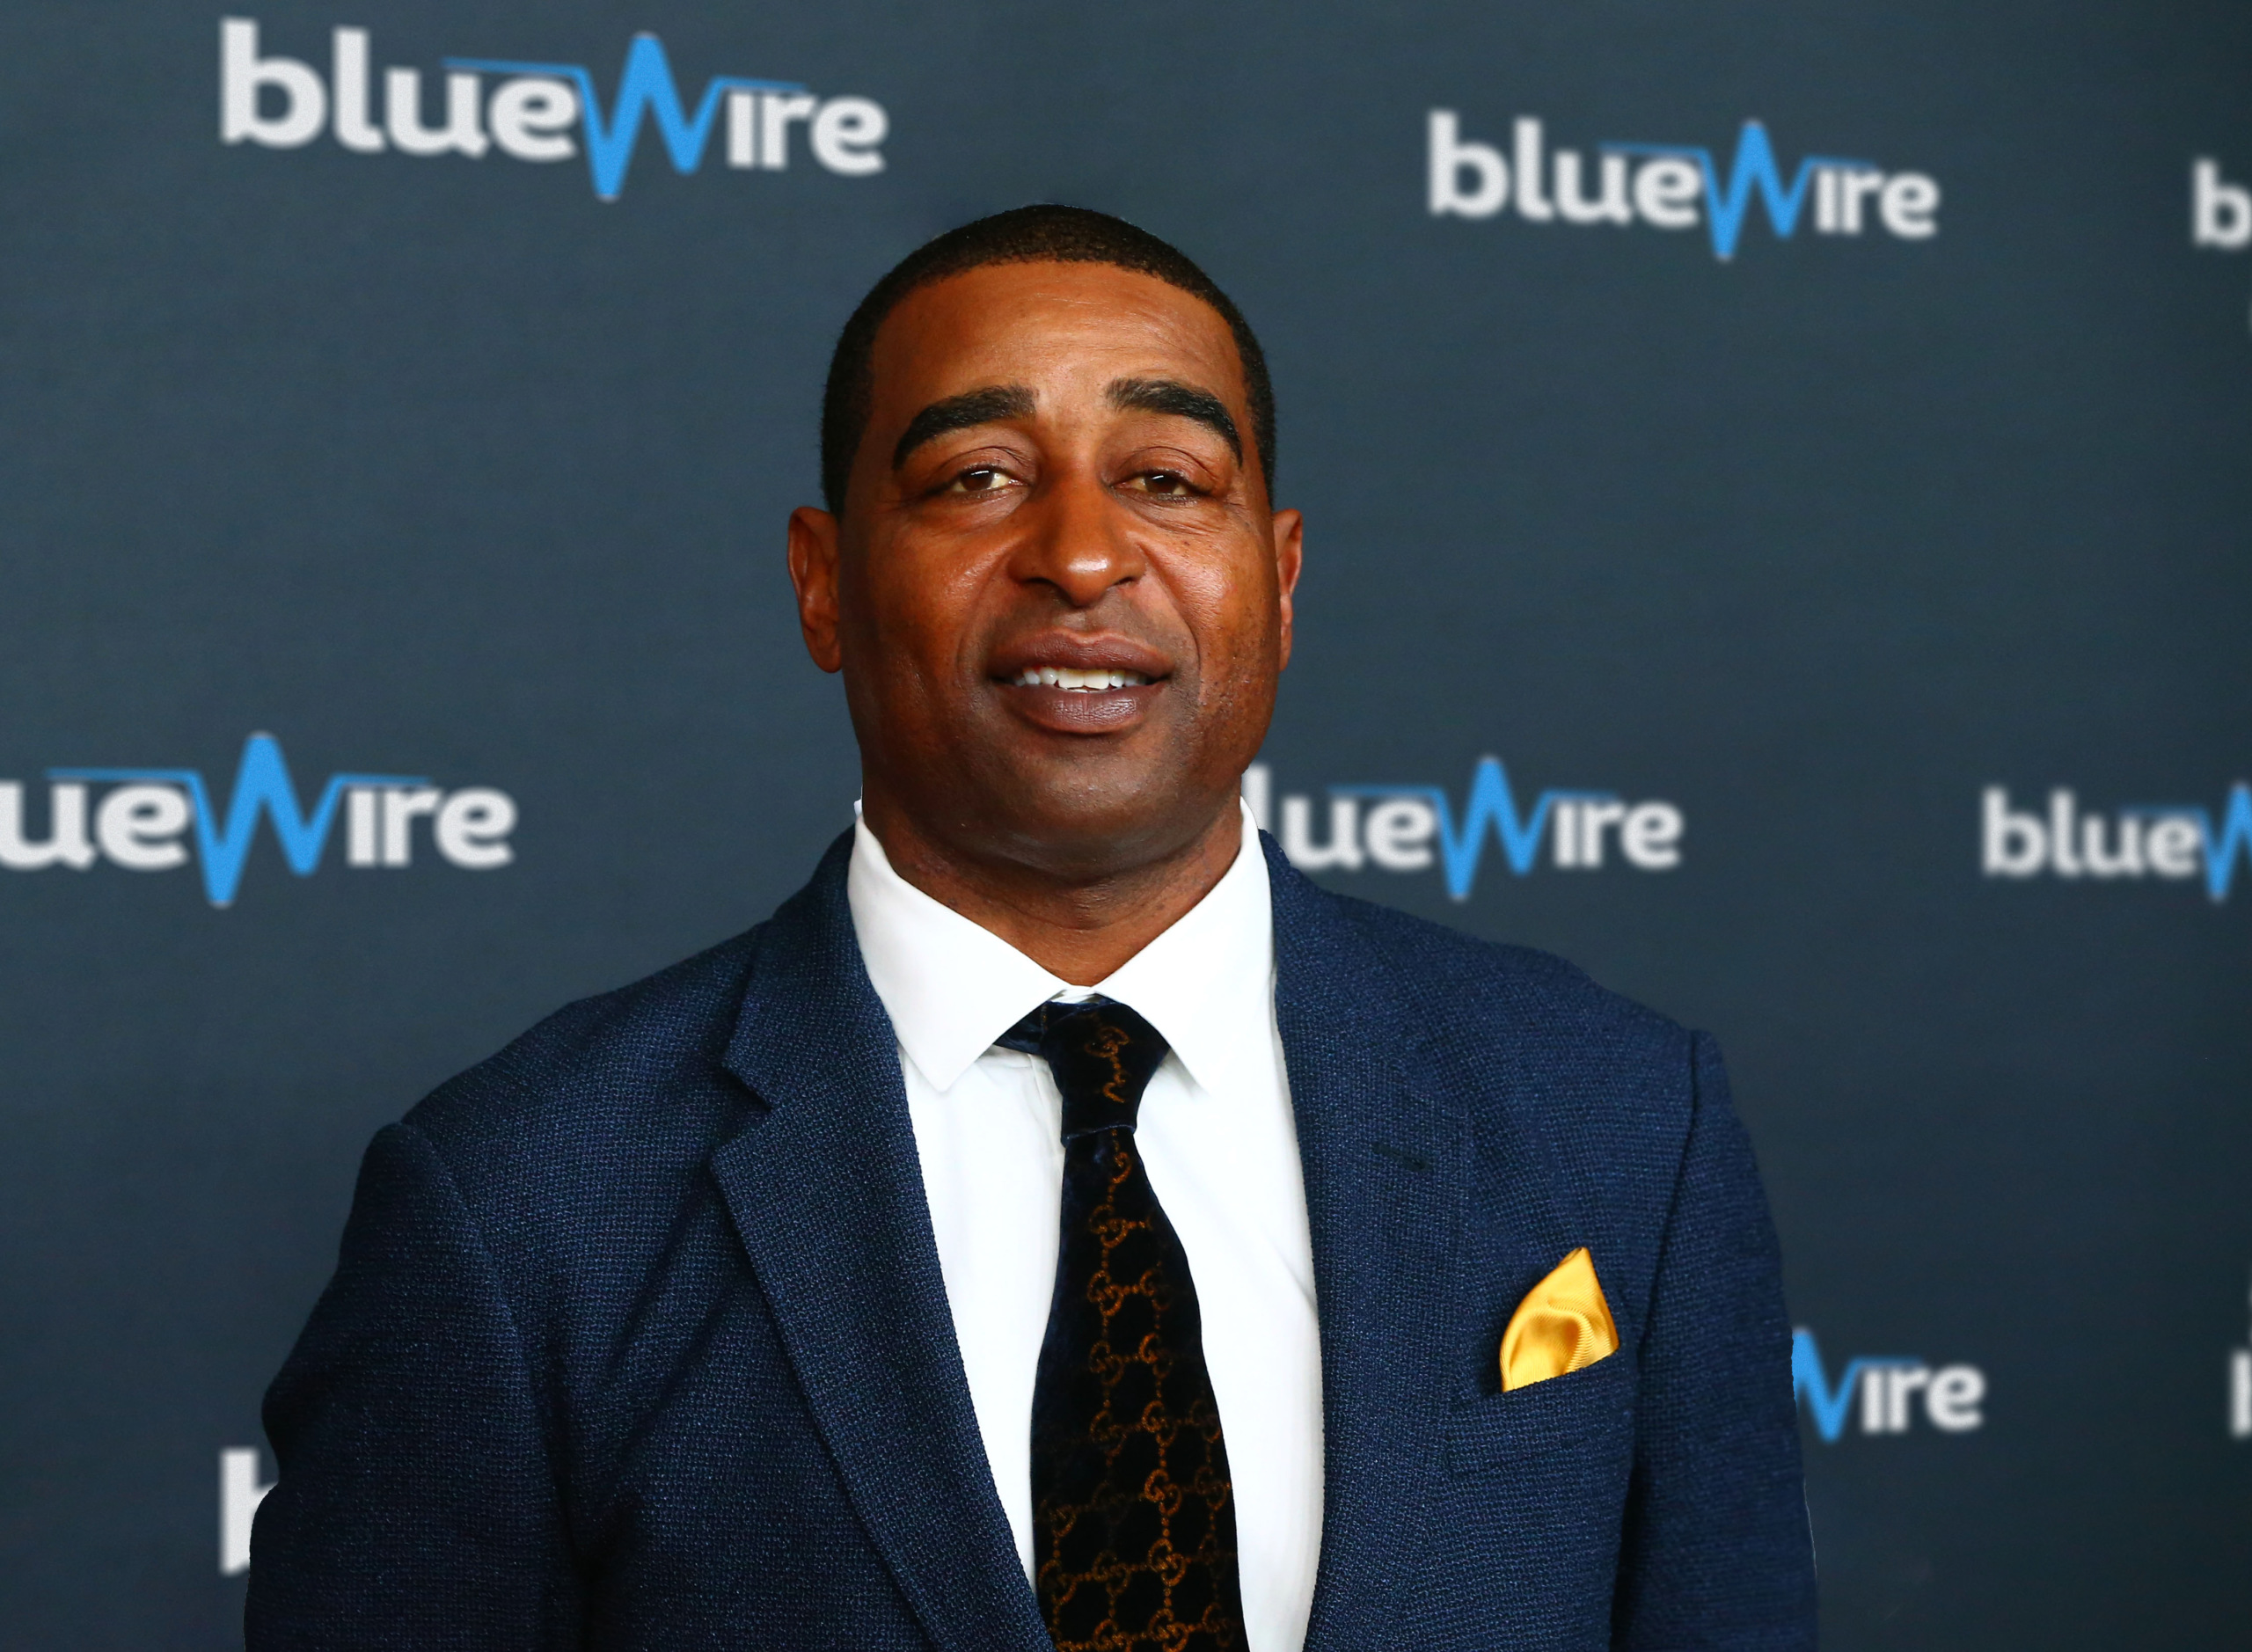 WR1 with Cris Carter